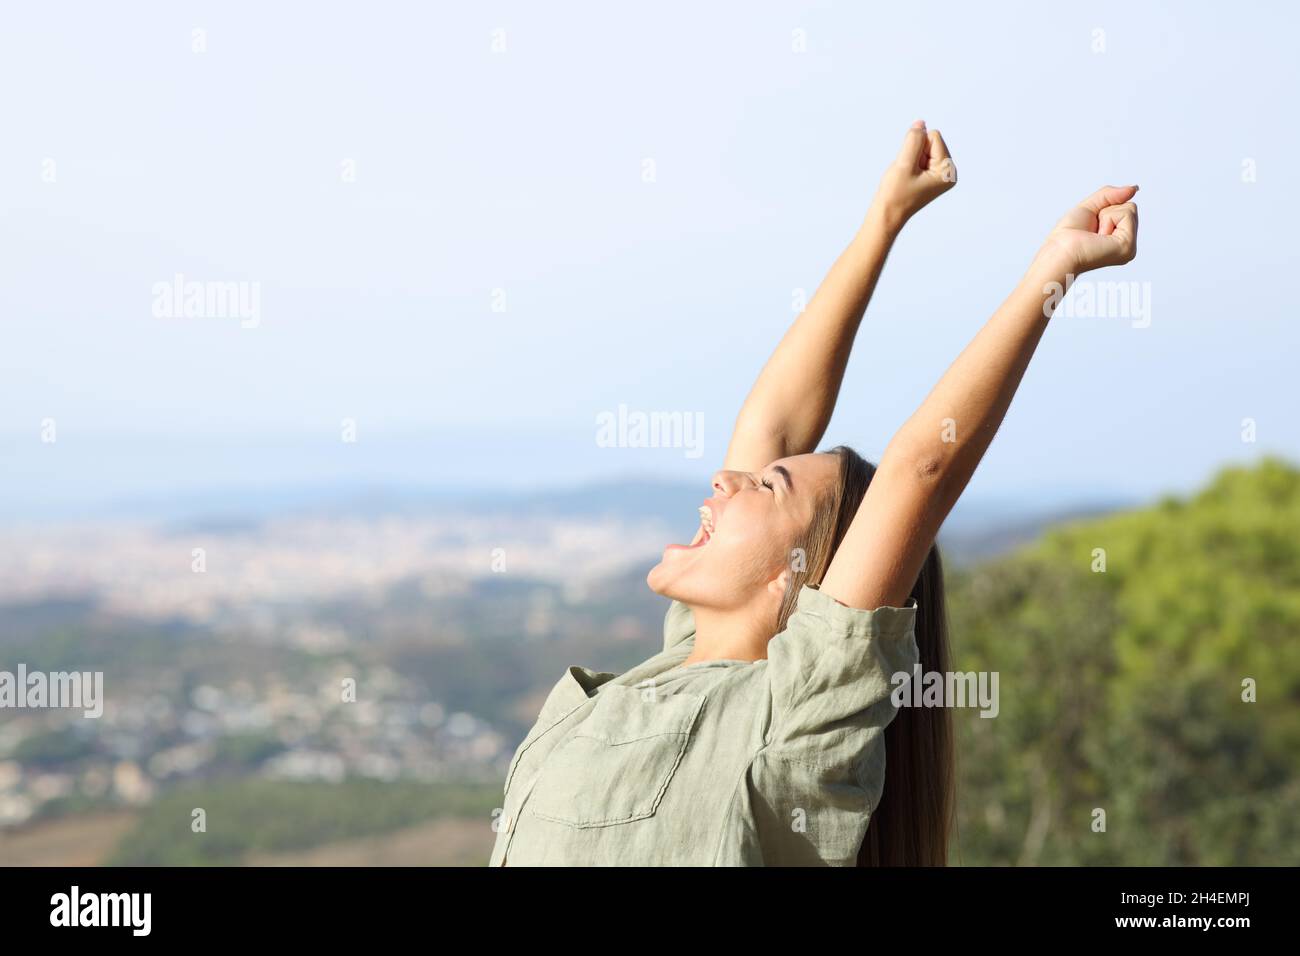 Profile of an excited teen celebrating raising arms outdoors Stock Photo